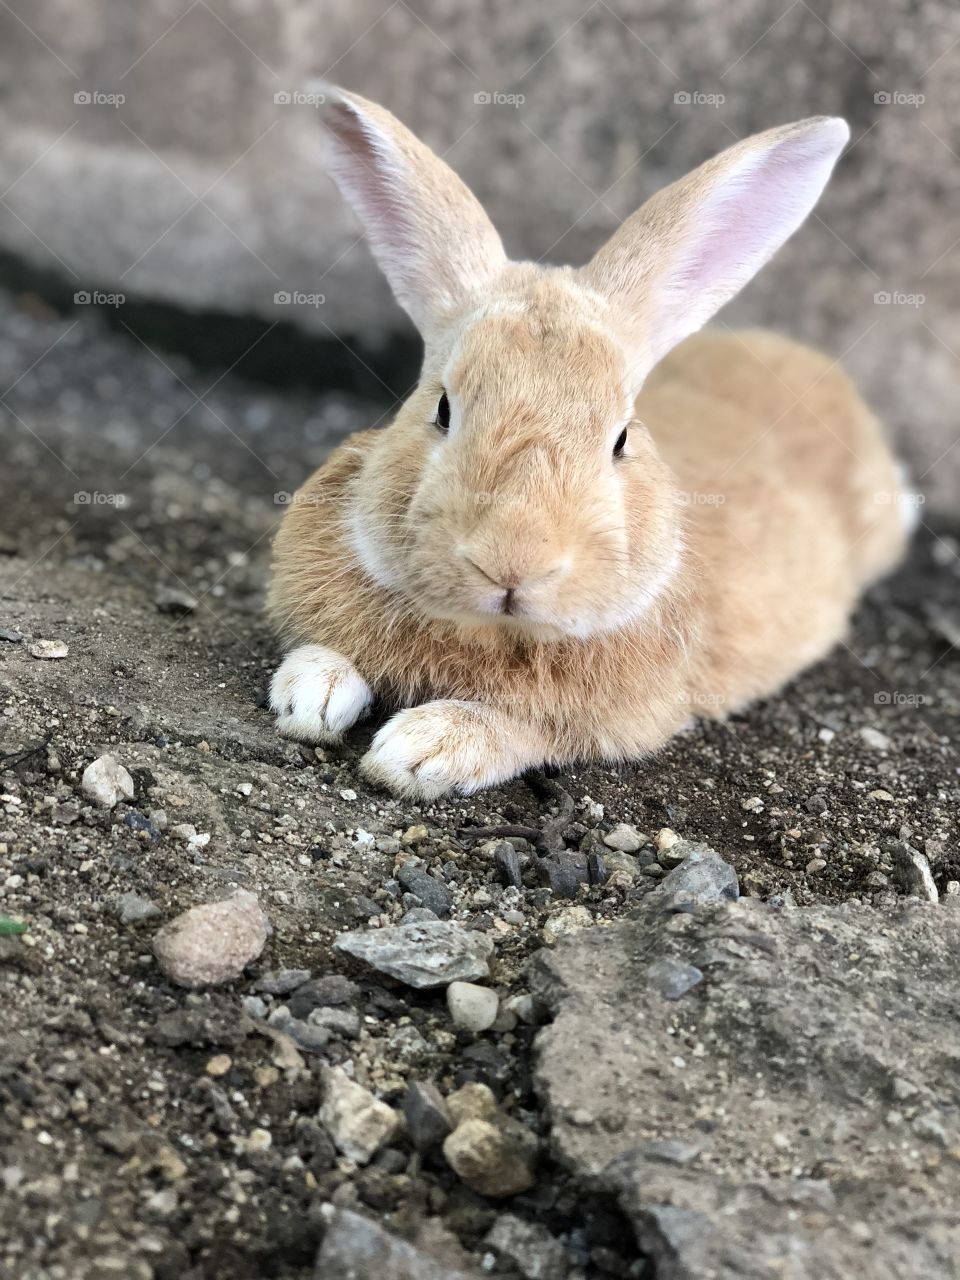 My bunny outside relaxing 